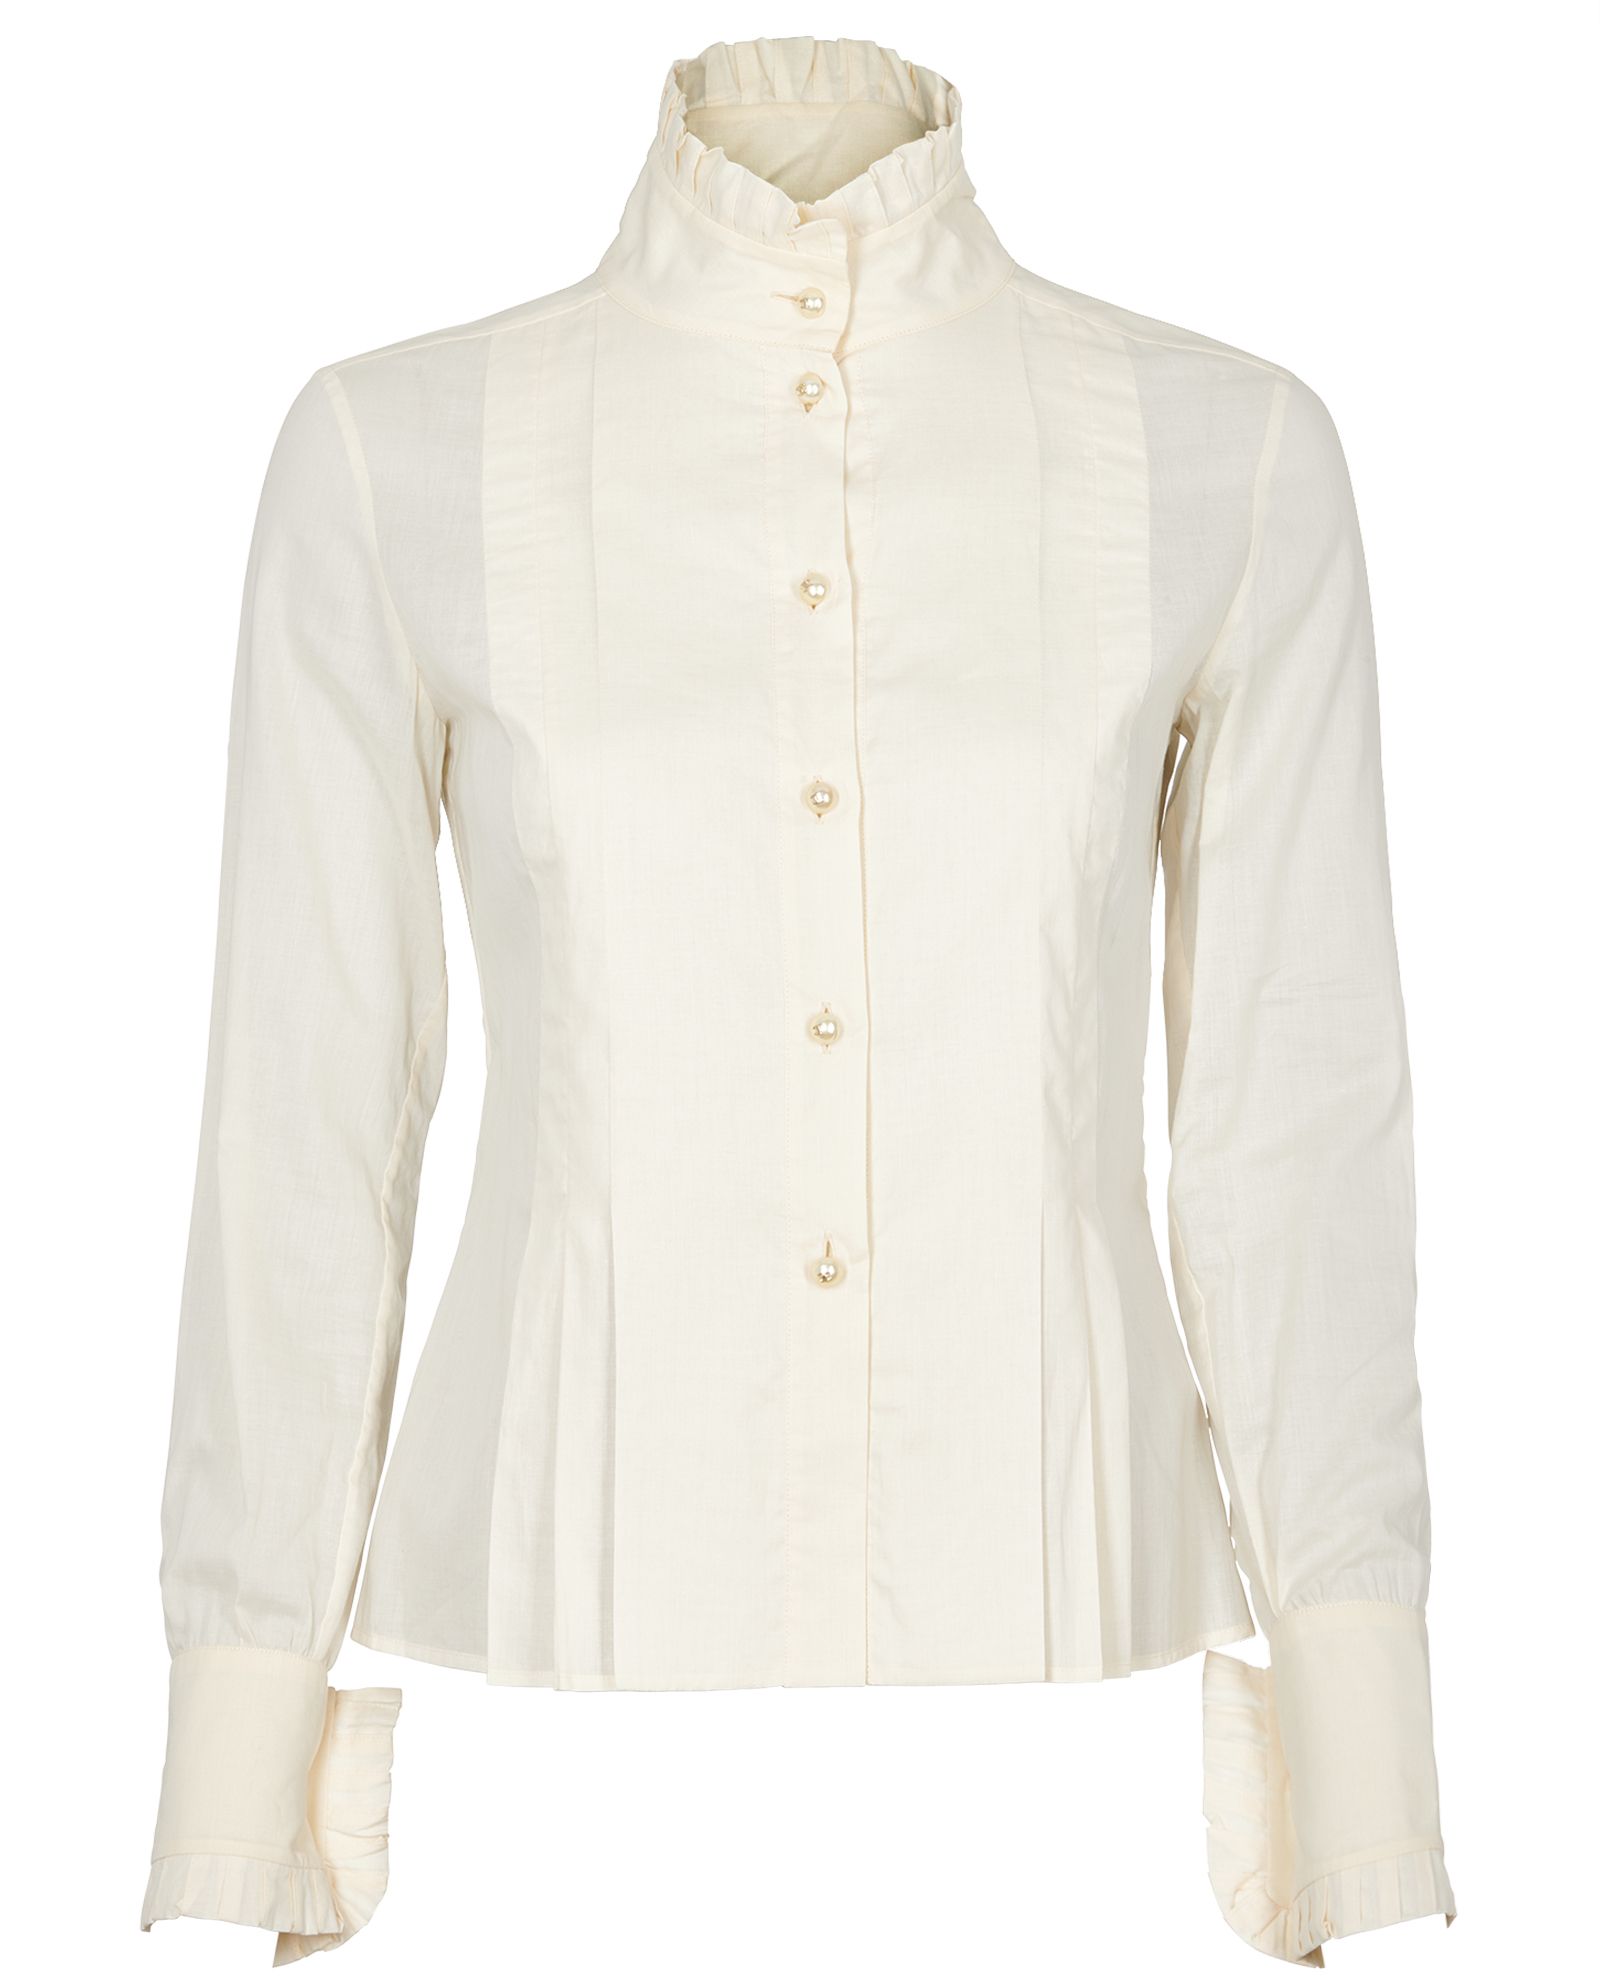 Chanel Frill High Neck Blouse